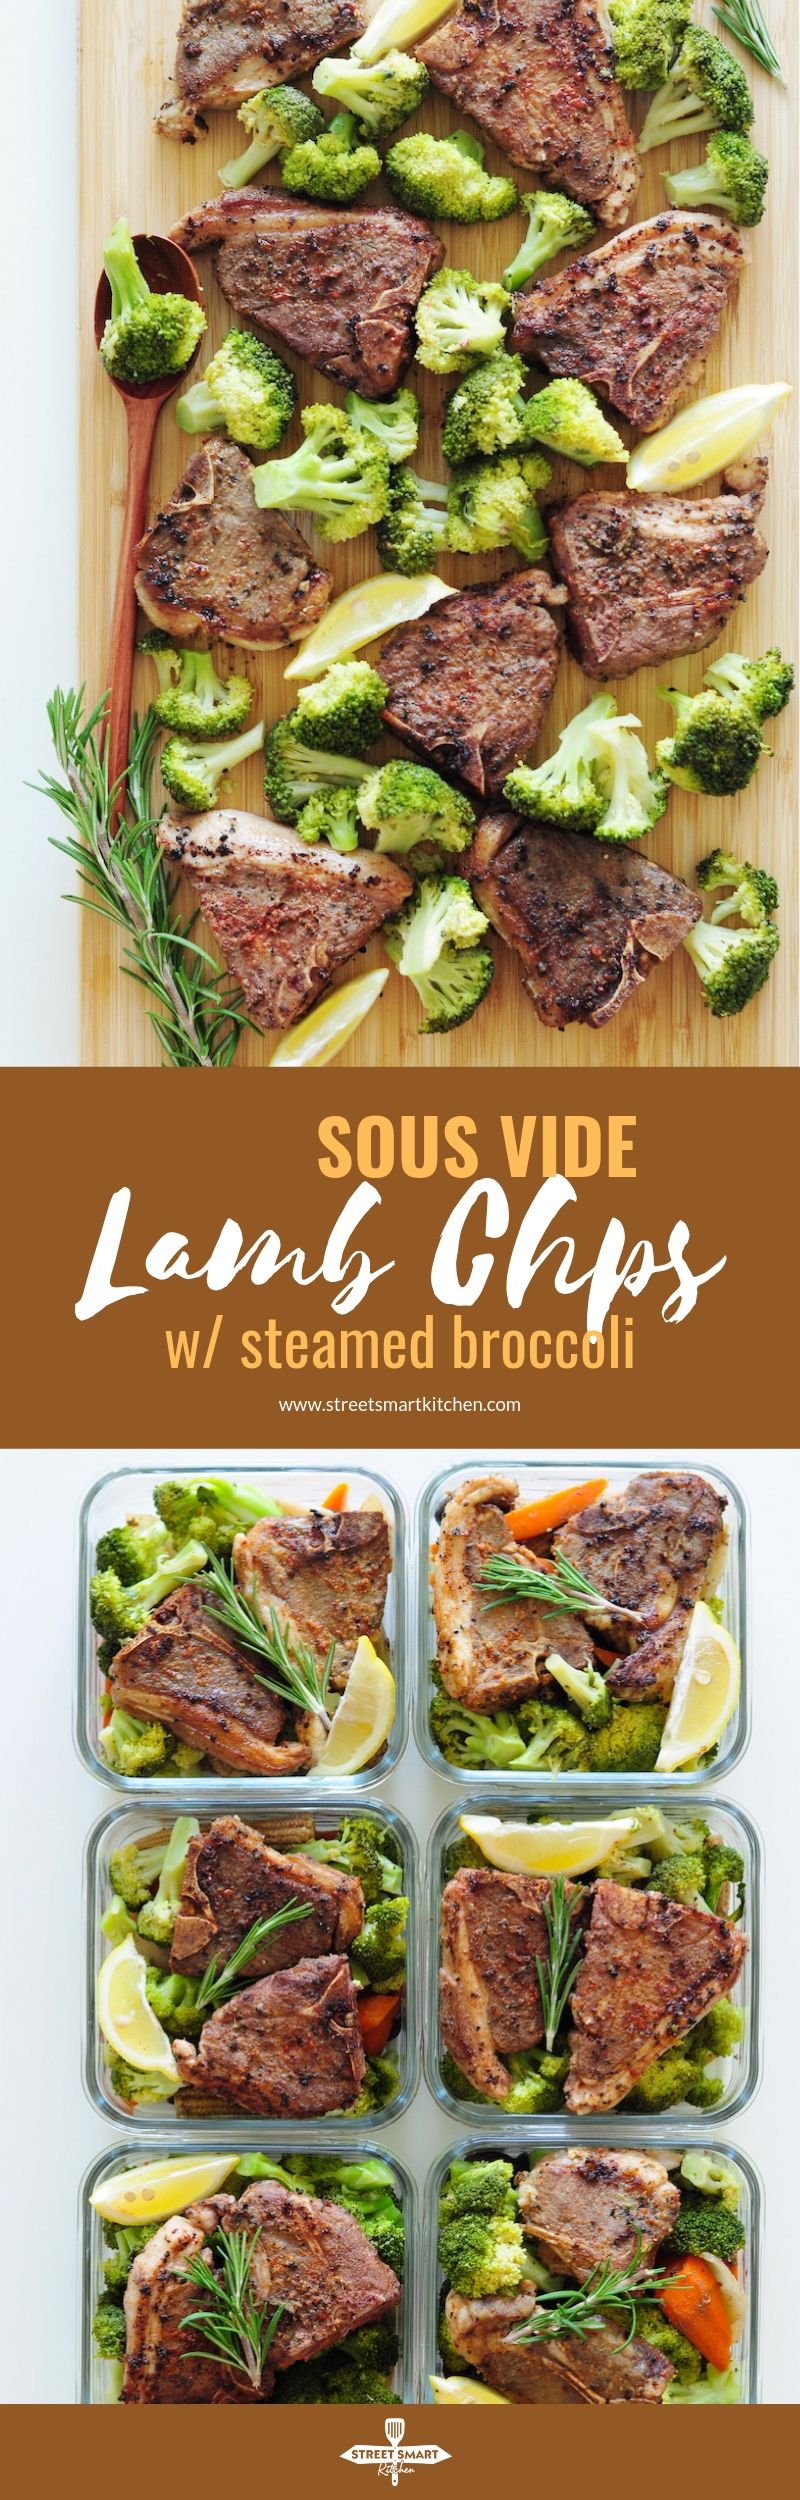 Tender, juicy, and melt-in-your-mouth from the inside out, these sous vide lamb chops are so easy to make! Pair them with steamed broccoli for a balanced and low-carb meal.